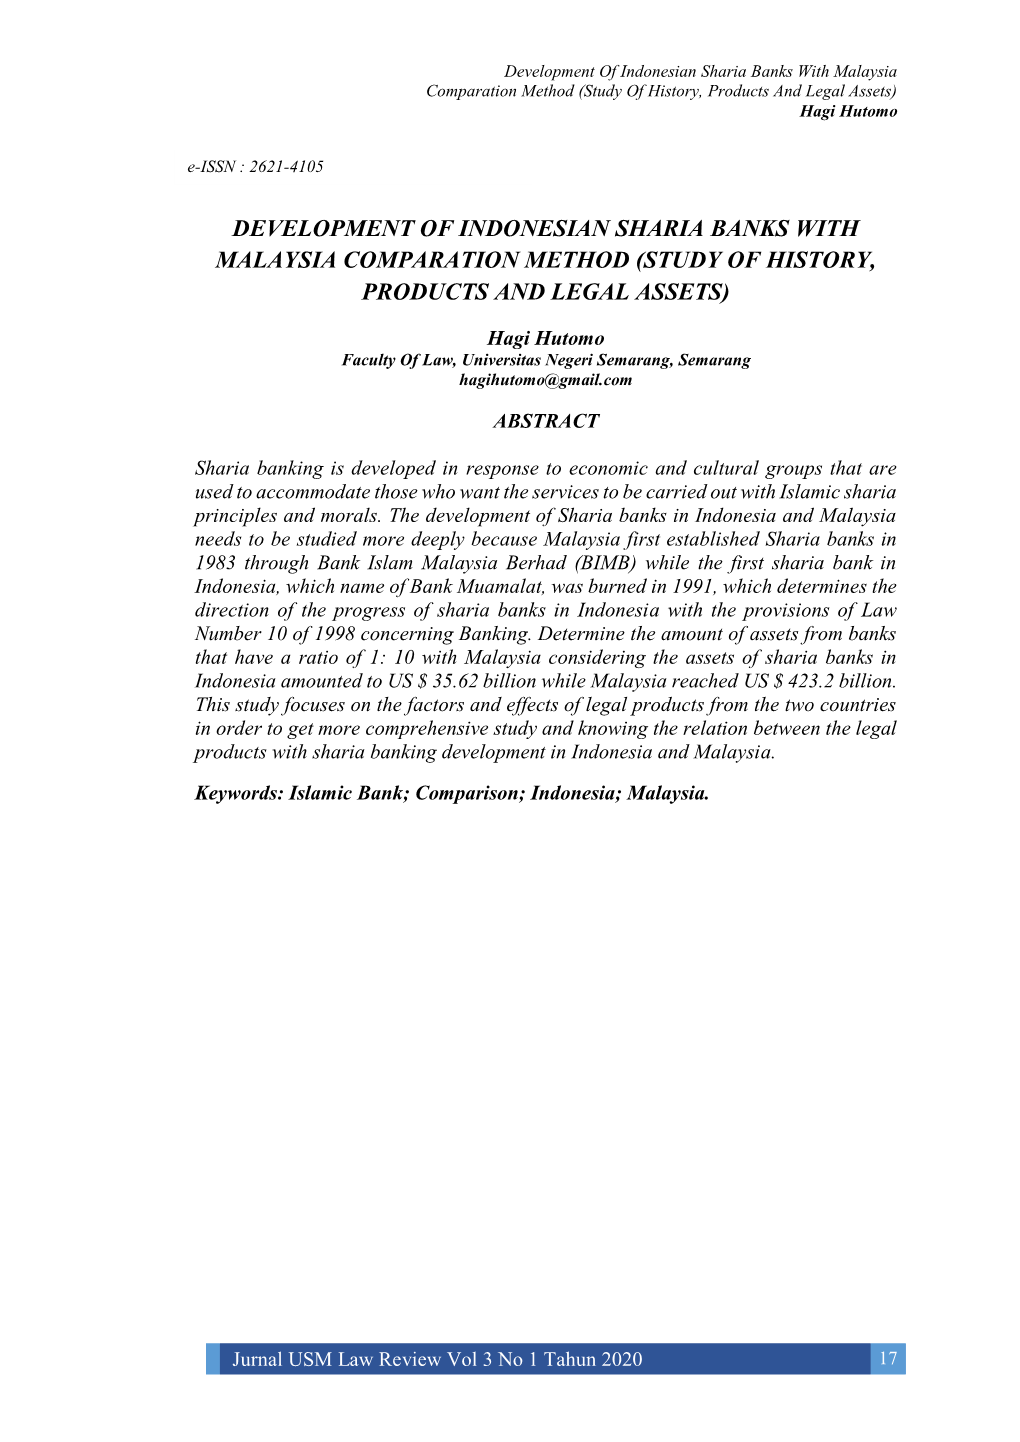 Development of Indonesian Sharia Banks with Malaysia Comparation Method (Study of History, Products and Legal Assets) Hagi Hutomo